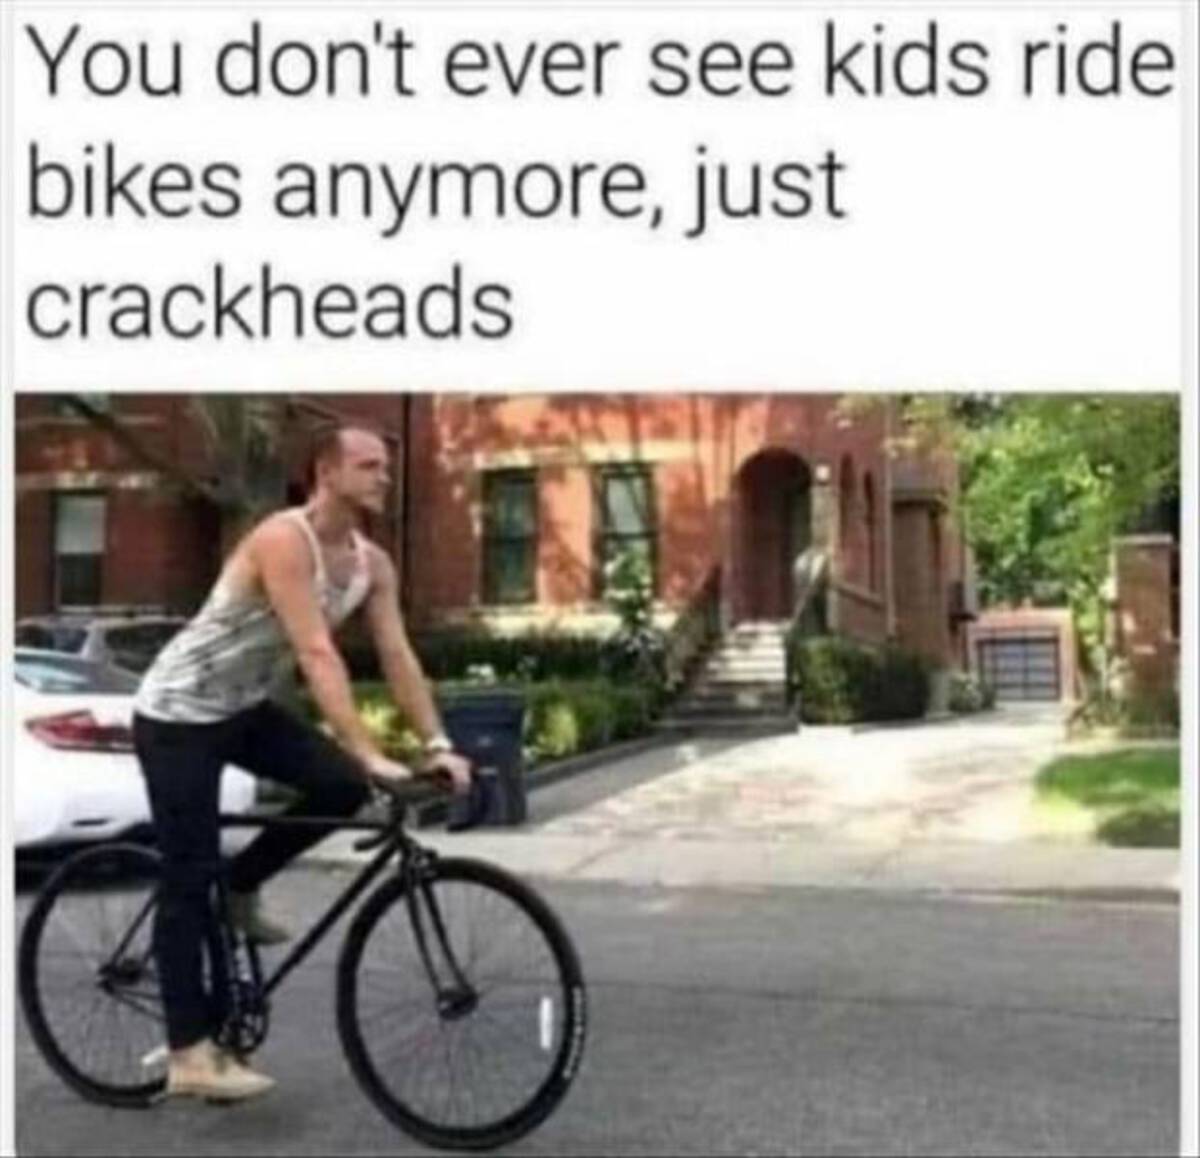 You don't ever see kids ride bikes anymore, just crackheads